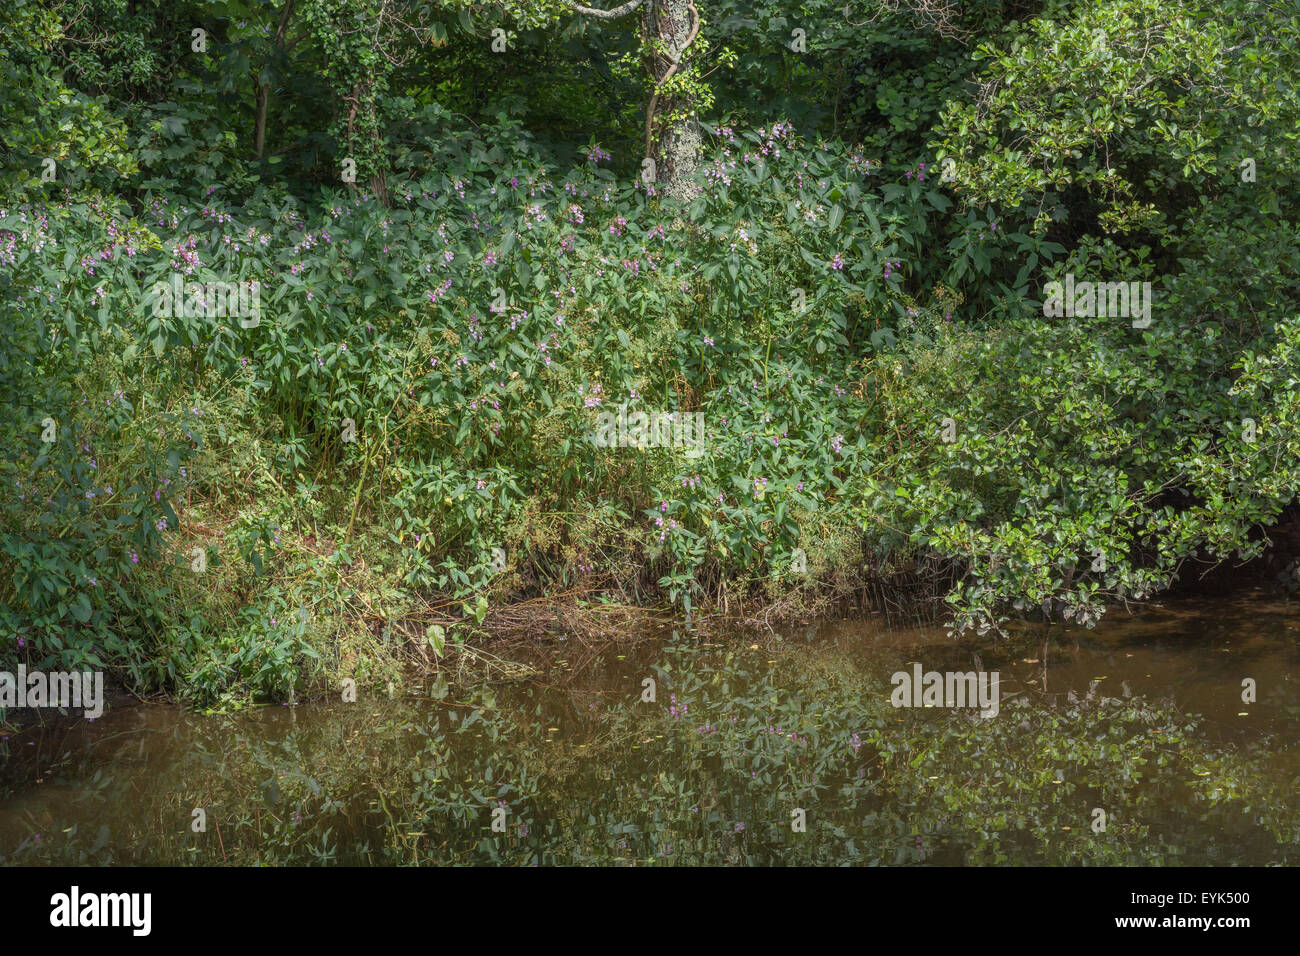 Indian Balsam / Himalayan balsam / Impatiens glandulifera. Invasive weed with affinity for damp and moist soils. Weed patch seen on River Fowey. Stock Photo